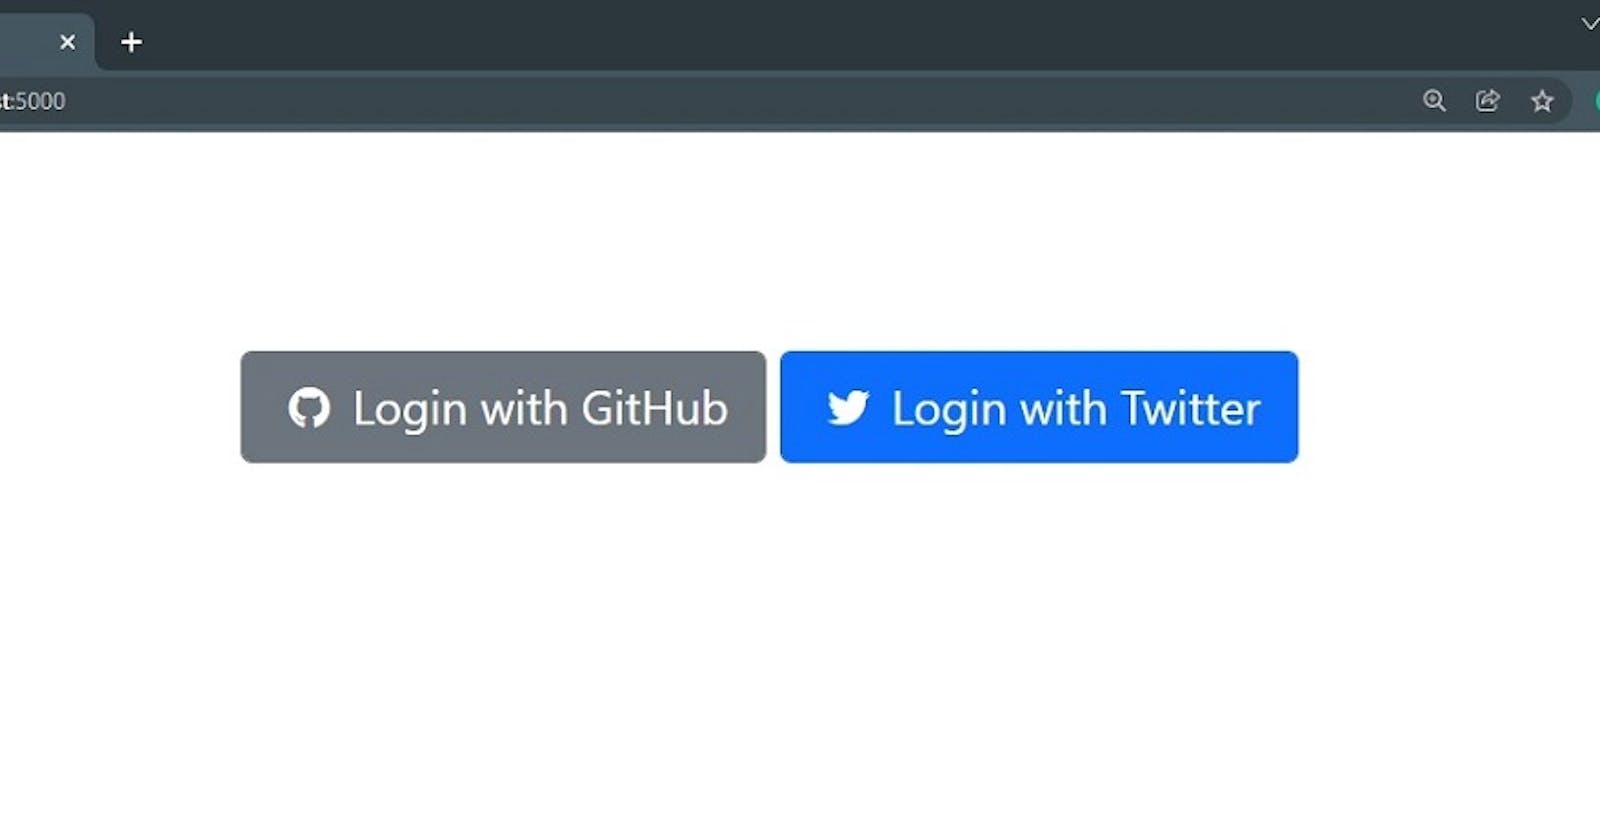 Flask Social Authentication for Github & Twitter (With Sample)